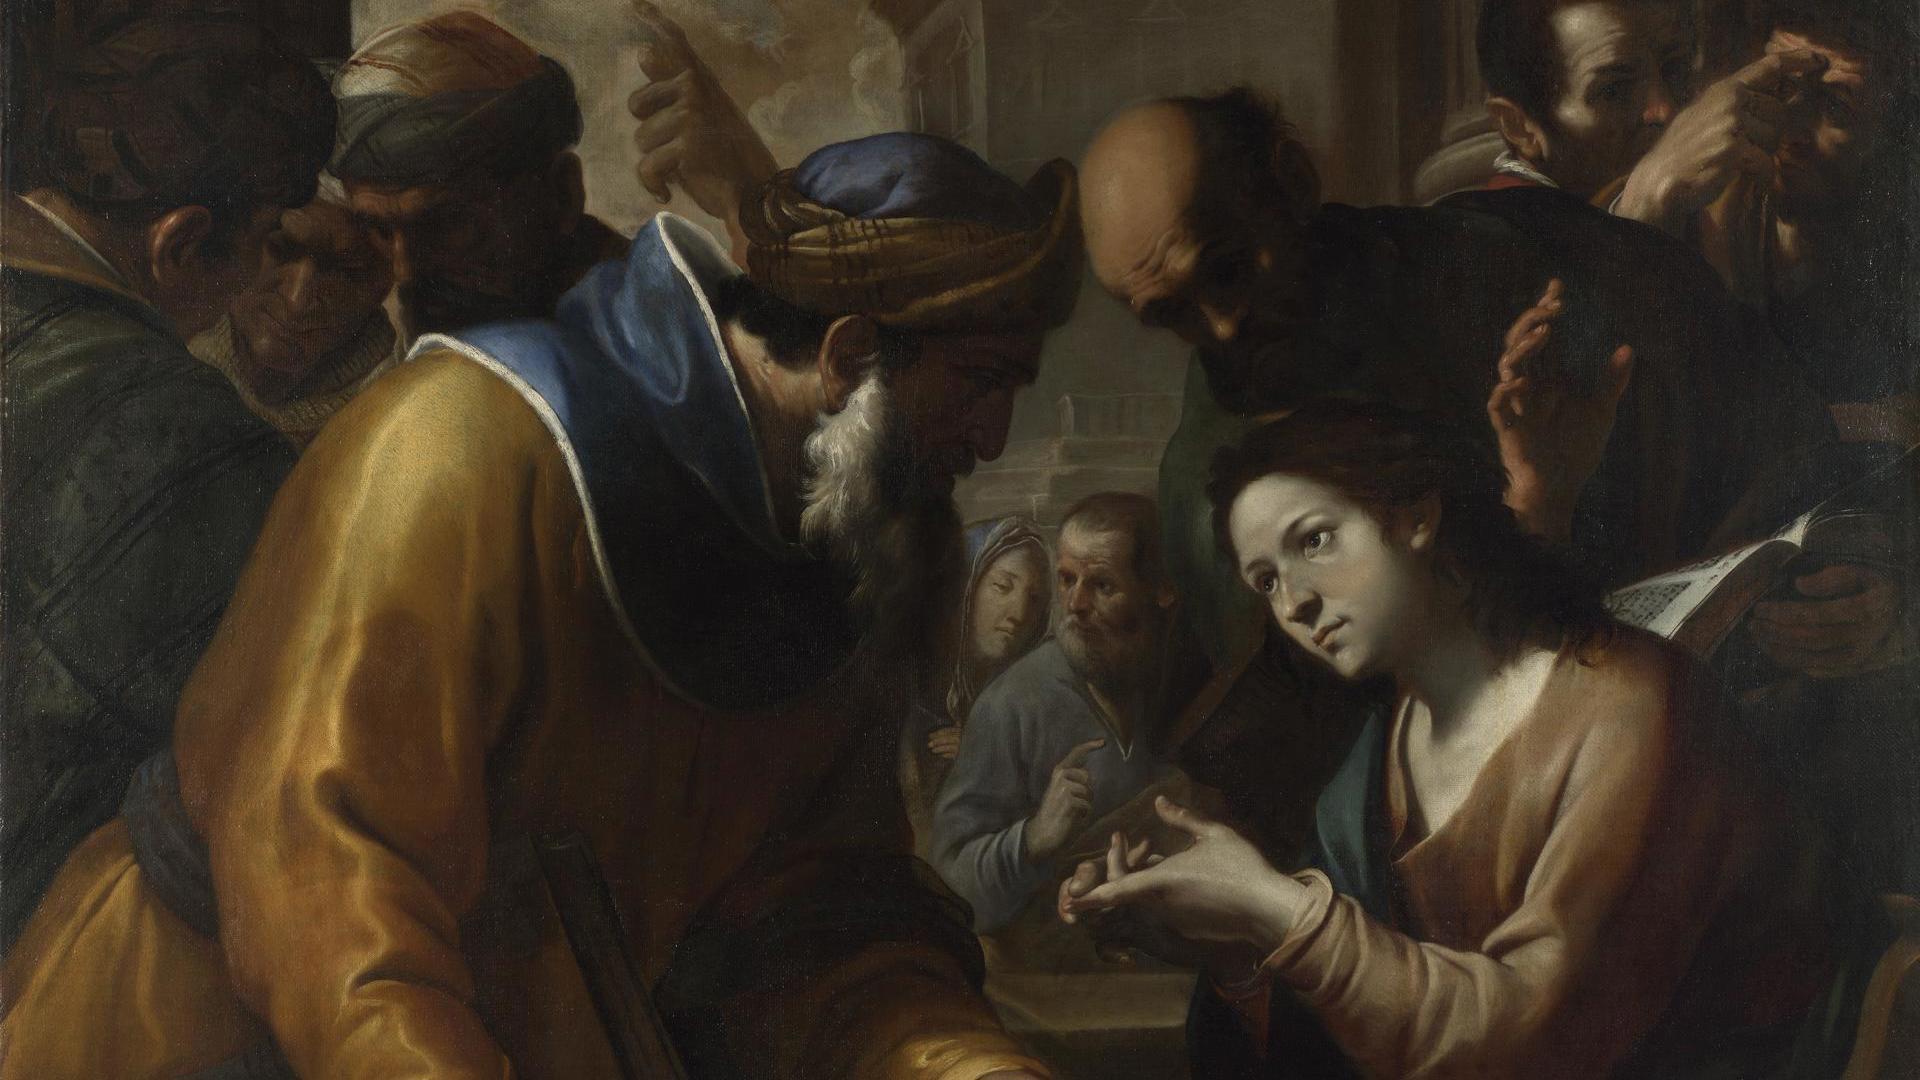 Christ disputing with the Doctors by Gregorio Preti